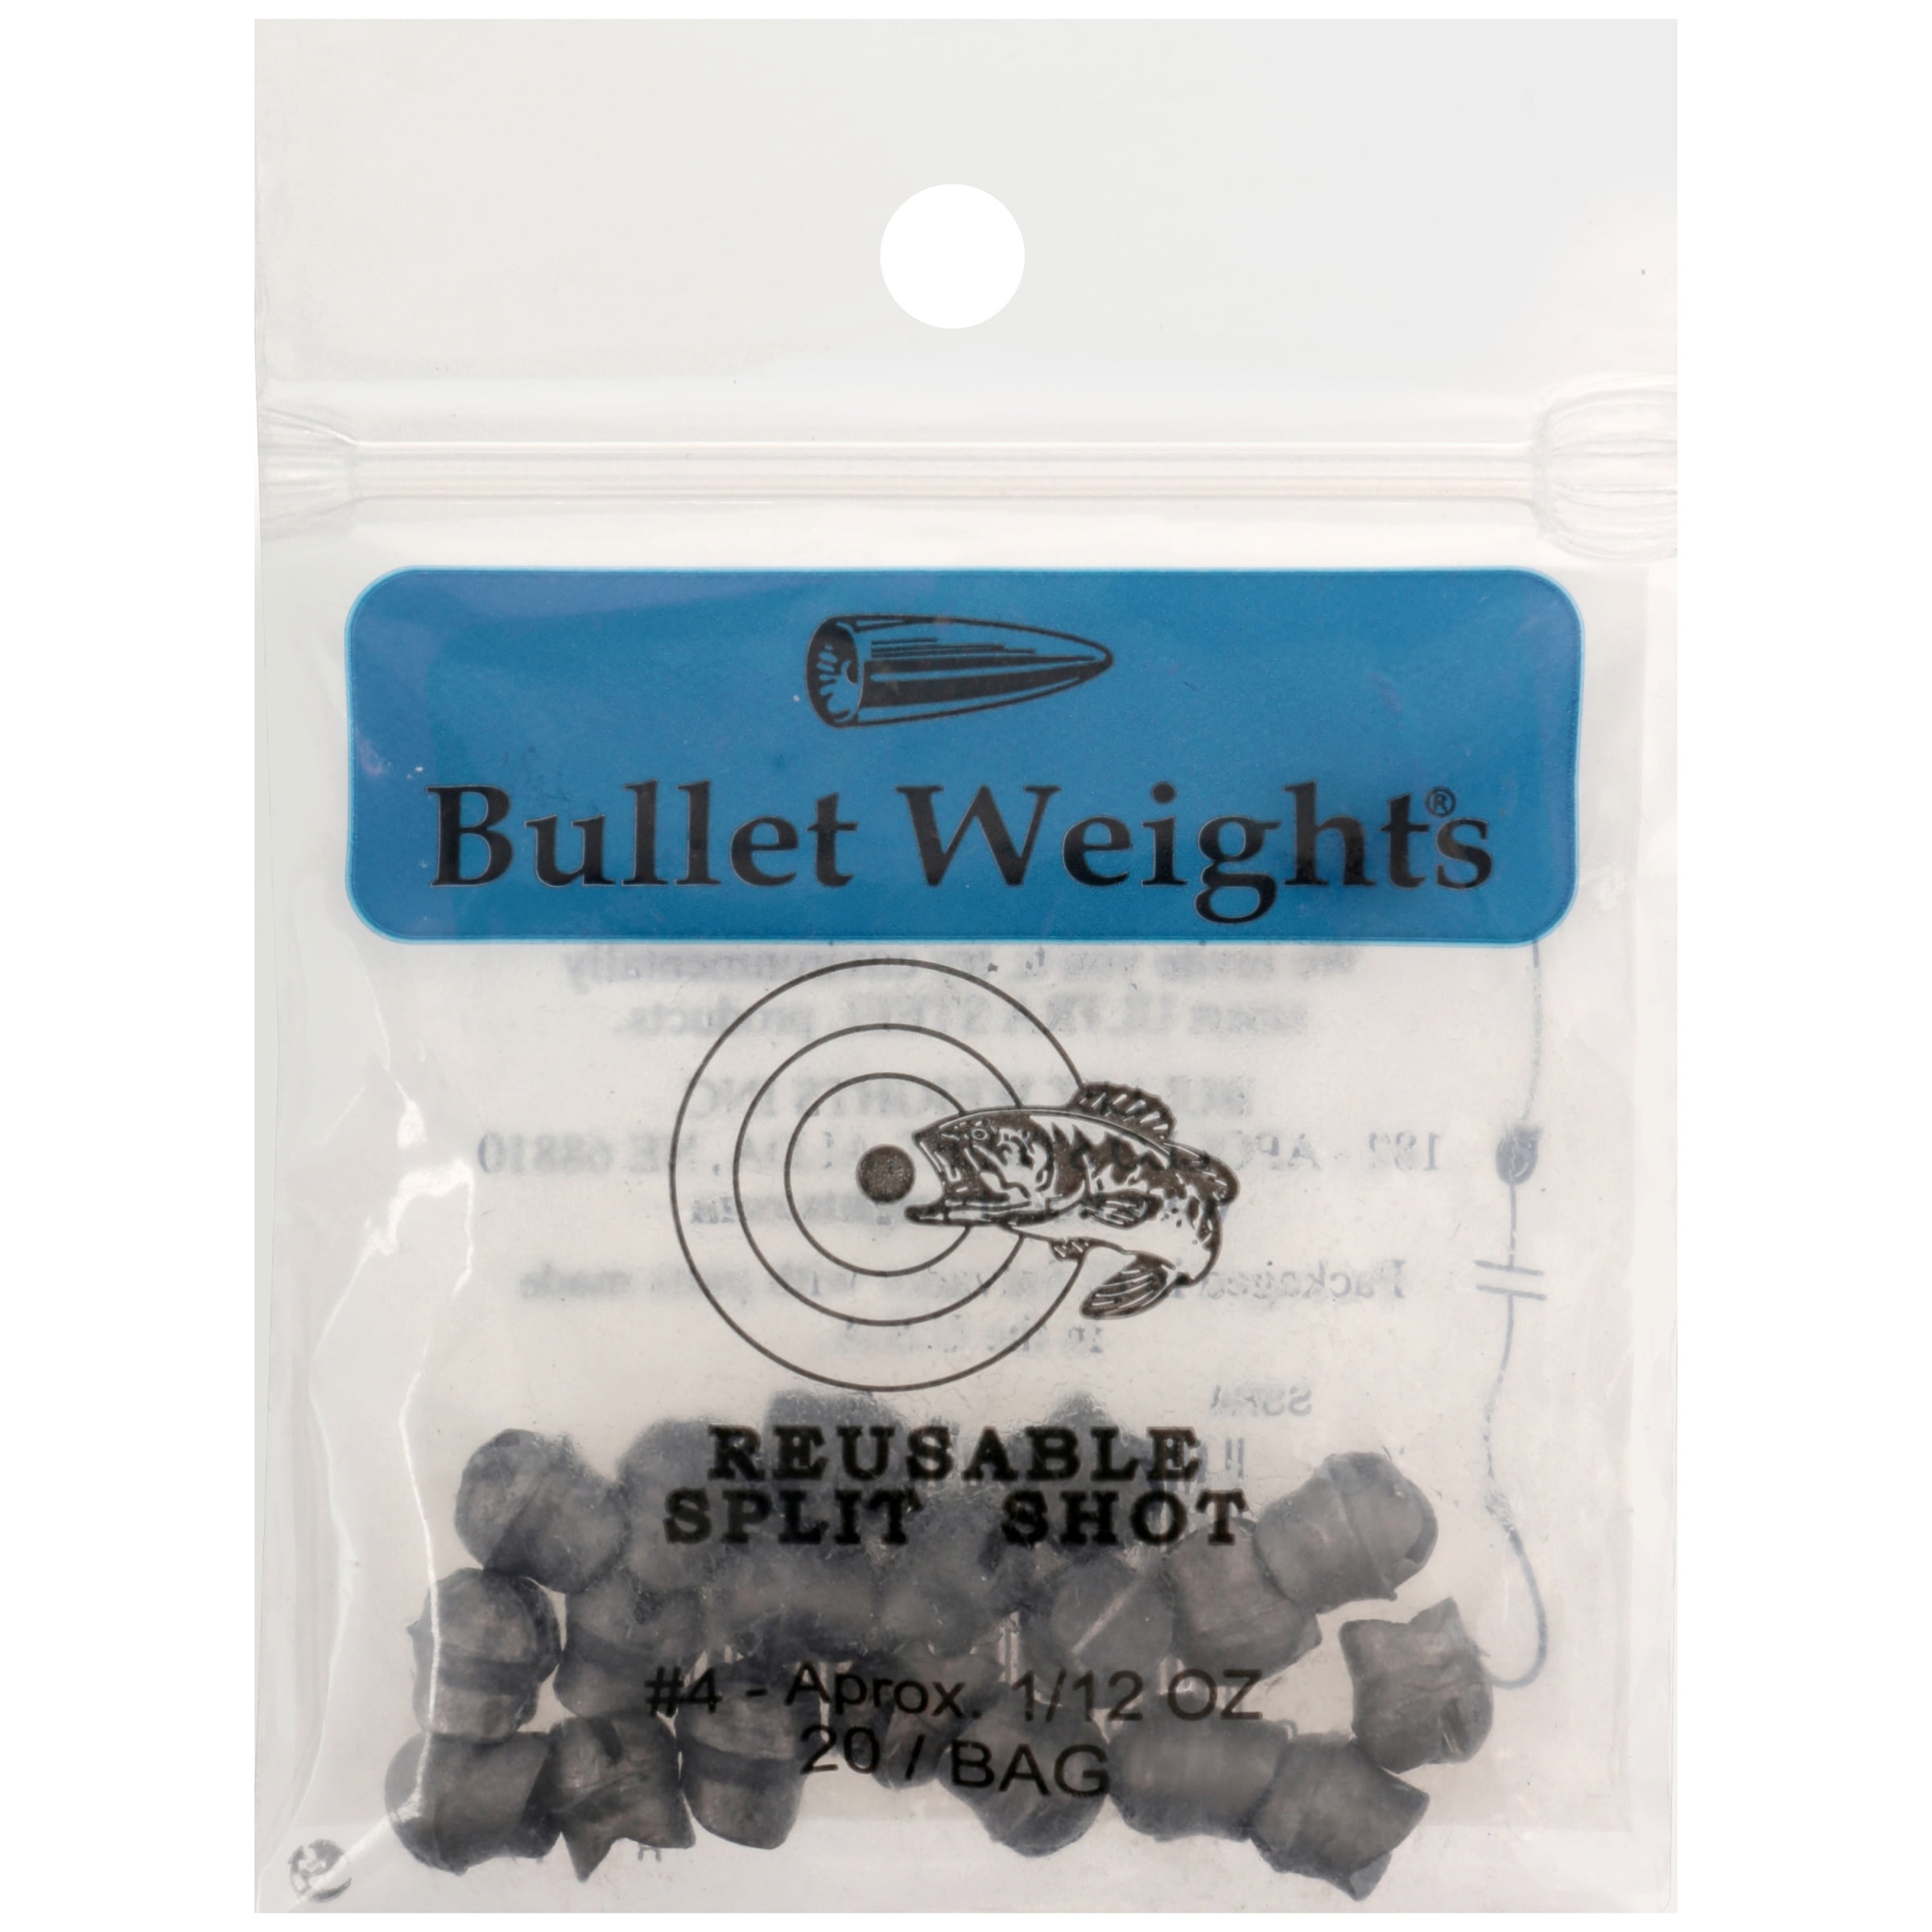 Bullet Weights® SSR4-24 Lead Reusable Split Shot Size 4 Fishing Weights 